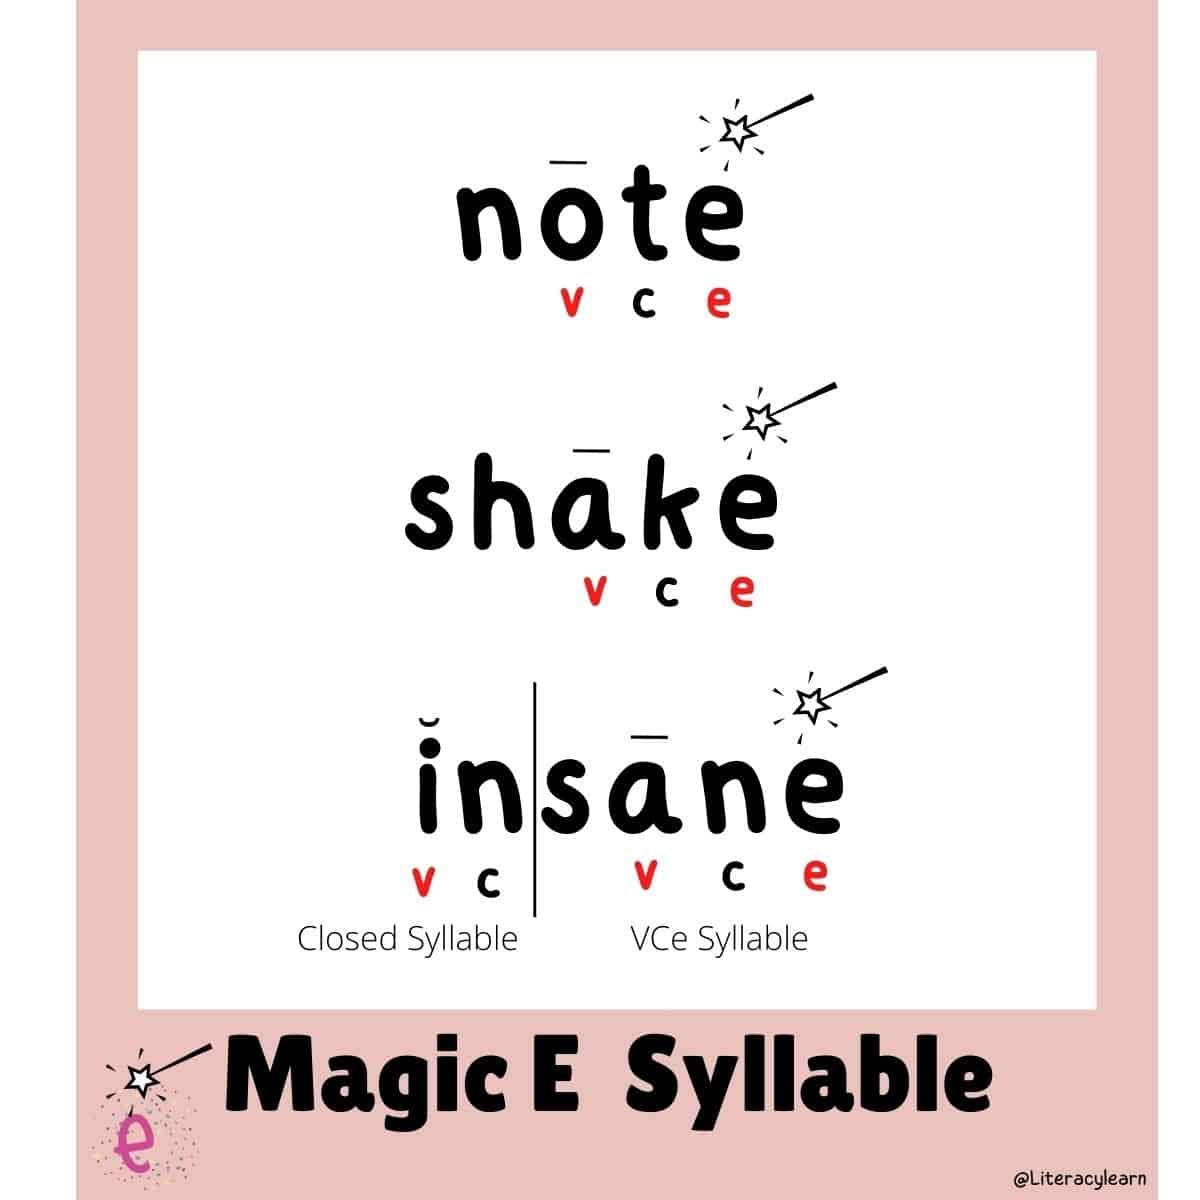 Magic e Syllable chart showing 3 words with the vowel, consonant, and e labeled. 